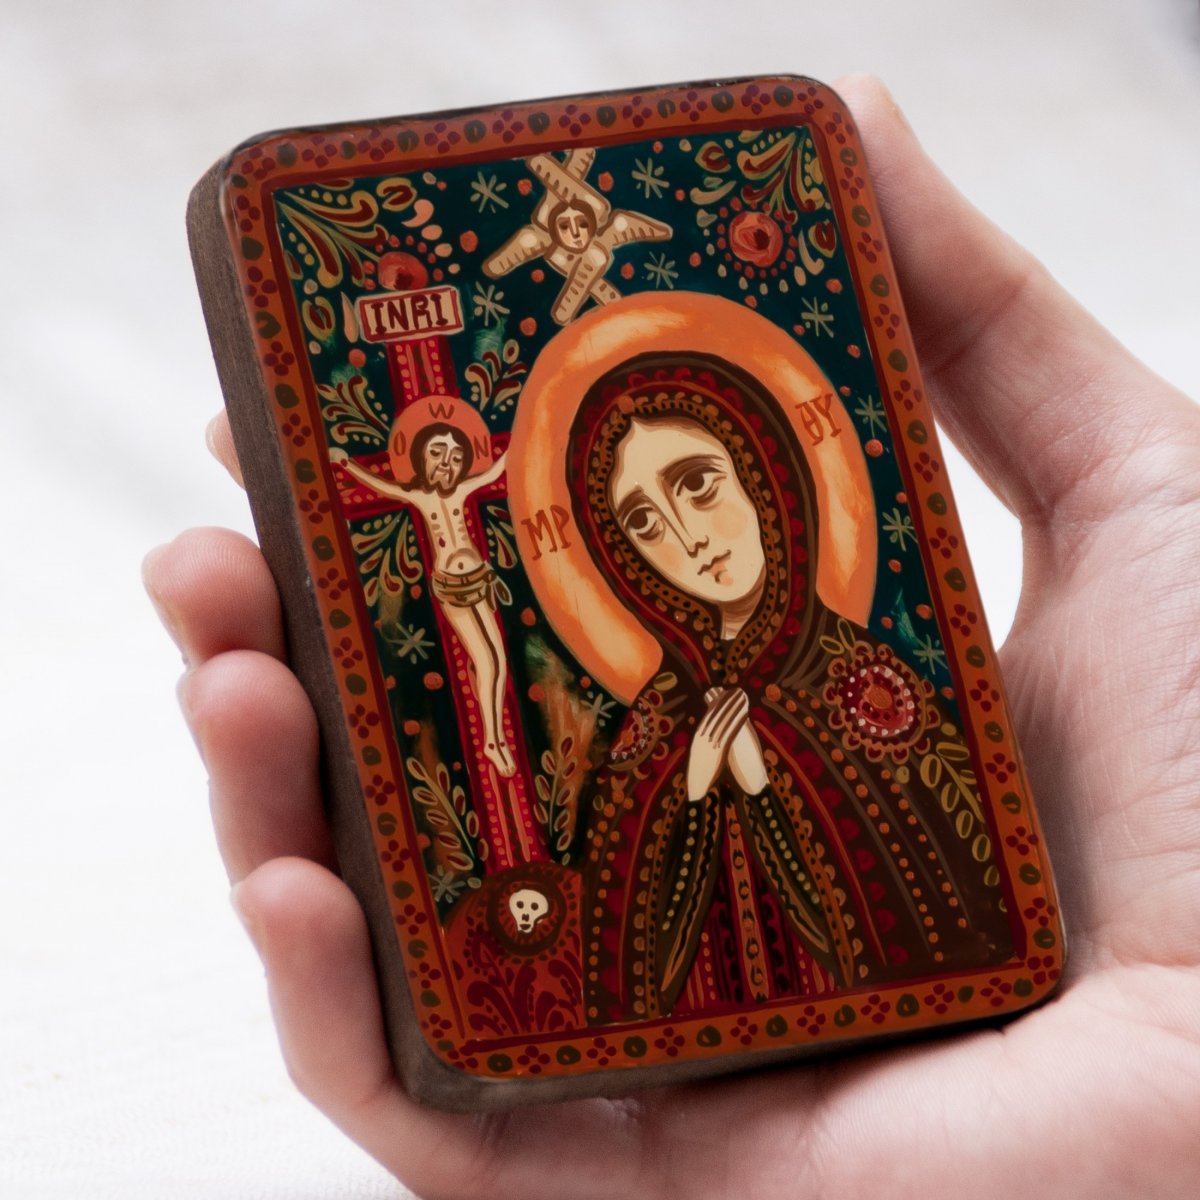 Wood icon, "Mourning Virgin Mary", miniature, 7x10cm